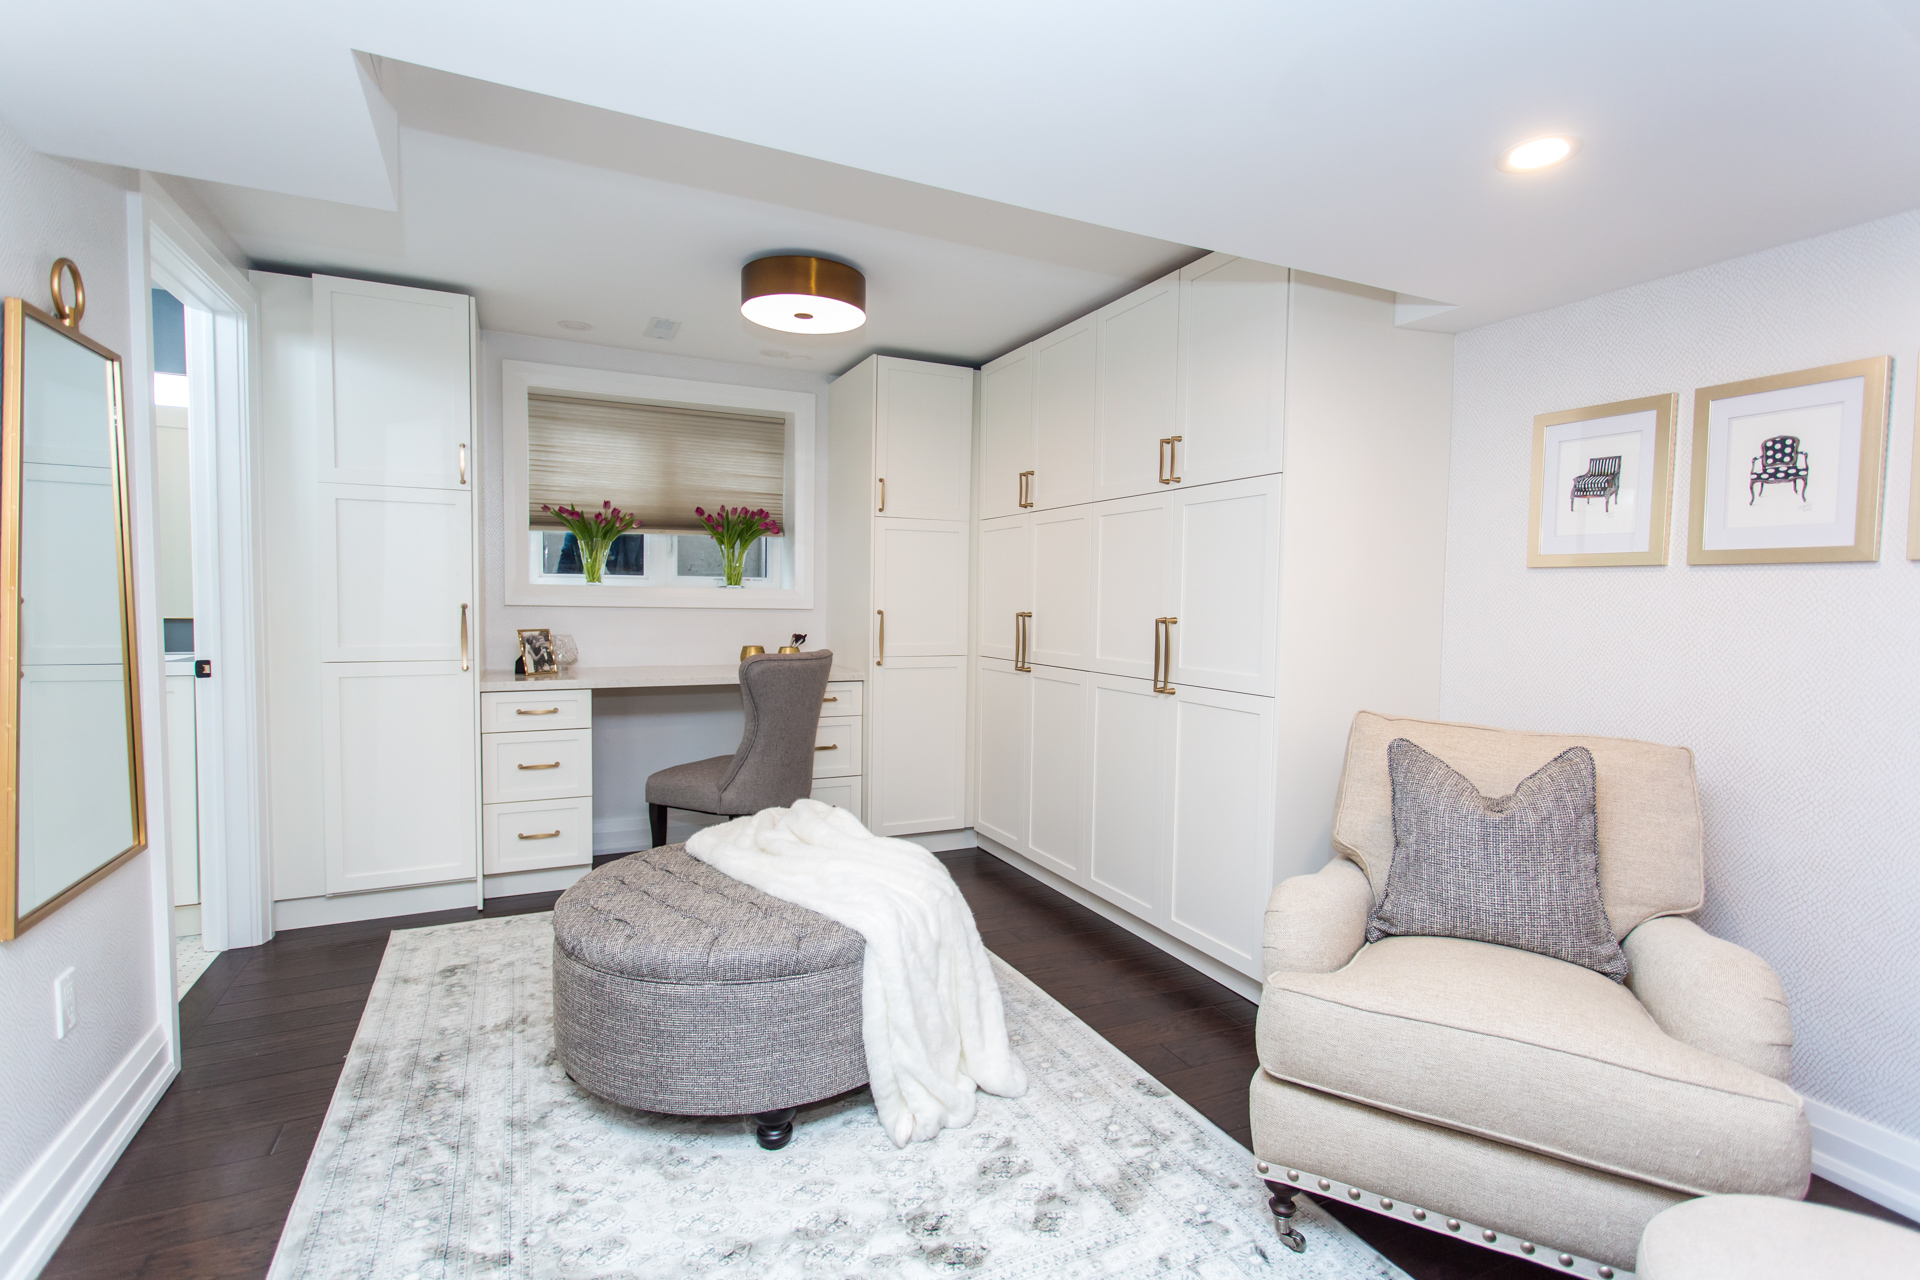 Basement suite dressing room with custom white built in cupboards